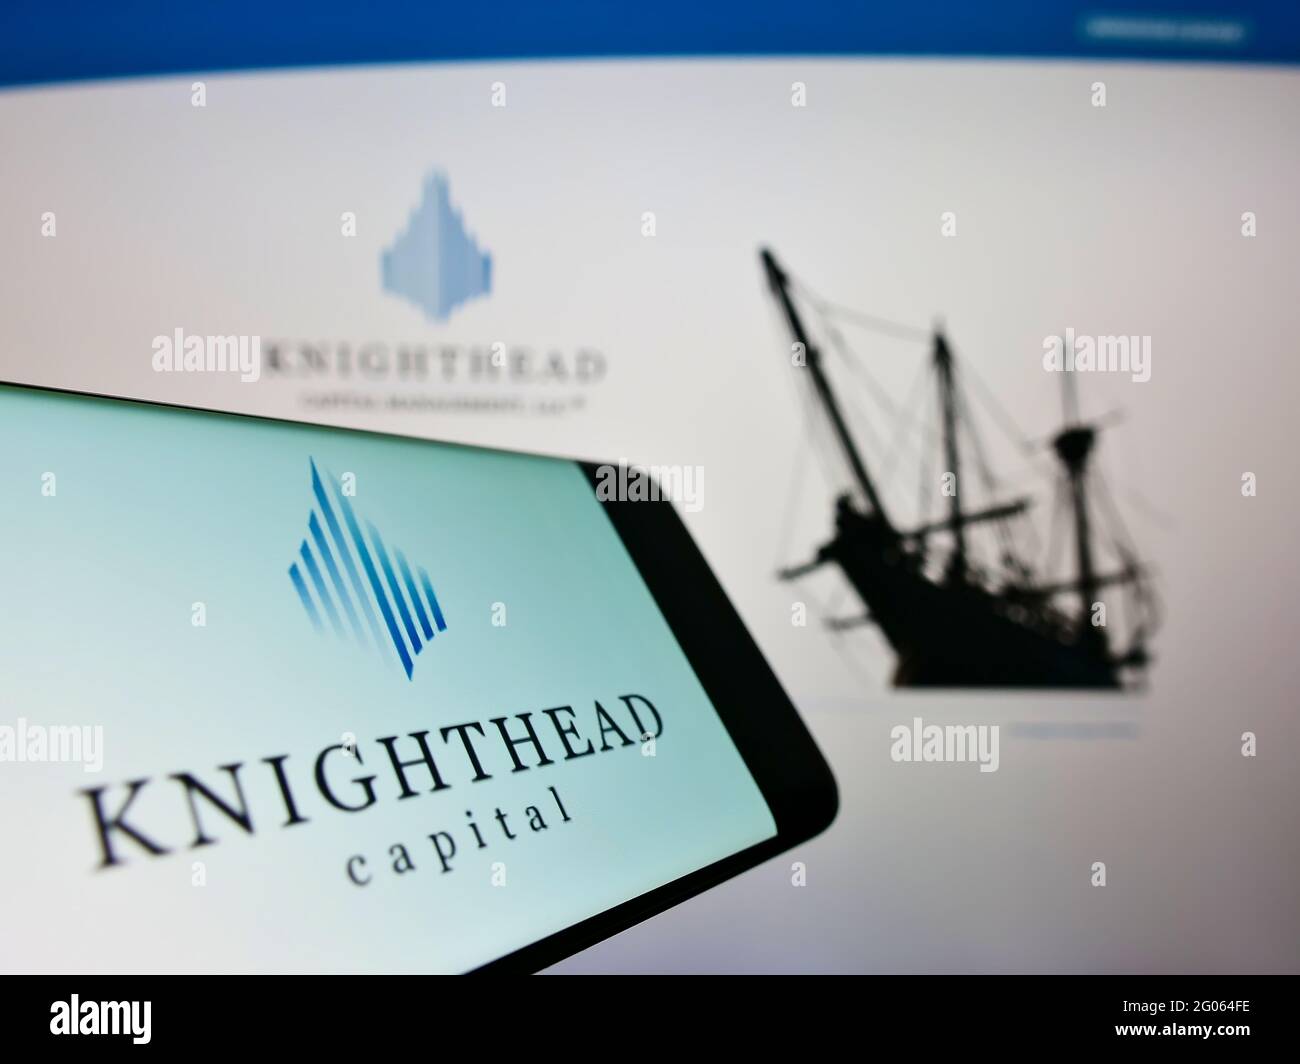 Cellphone with logo of investment adviser Knighthead Capital Management LLC on screen in front of webpage. Focus on center-right of phone display. Stock Photo